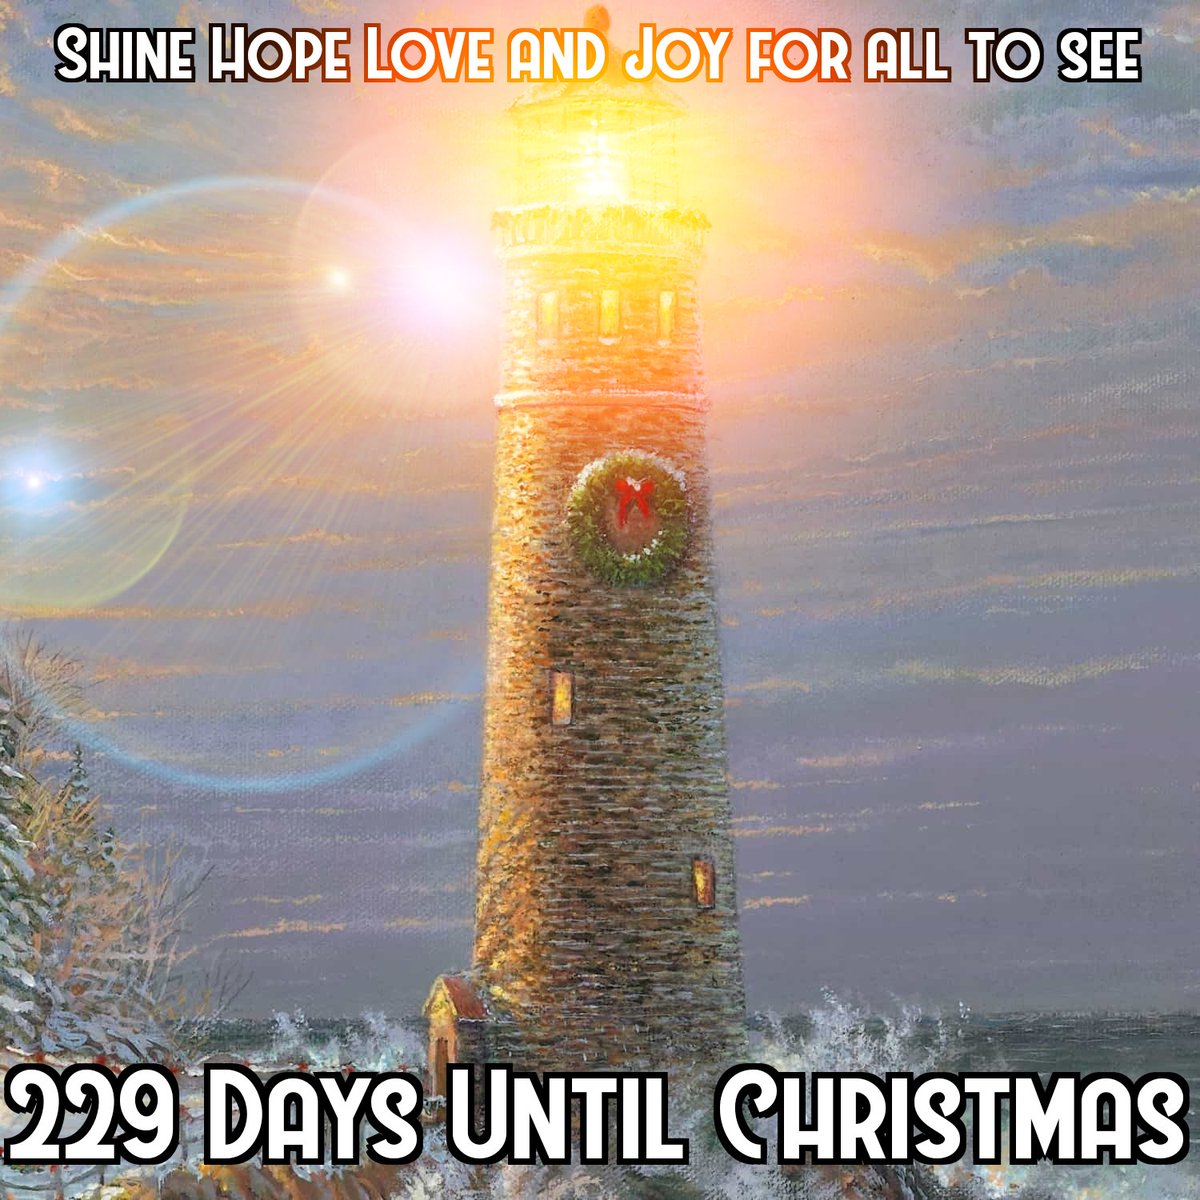 Happy Friday Everyone! Let the Hope, Love and Joy in your heart be a beacon for all the world to see and follow. Have a blessed day and be a blessing.

#christmascountdown #christmas #countdowntochristmas #HopeLoveJoy #blessing #blessed #friday #believe #share #eastcoastsanta